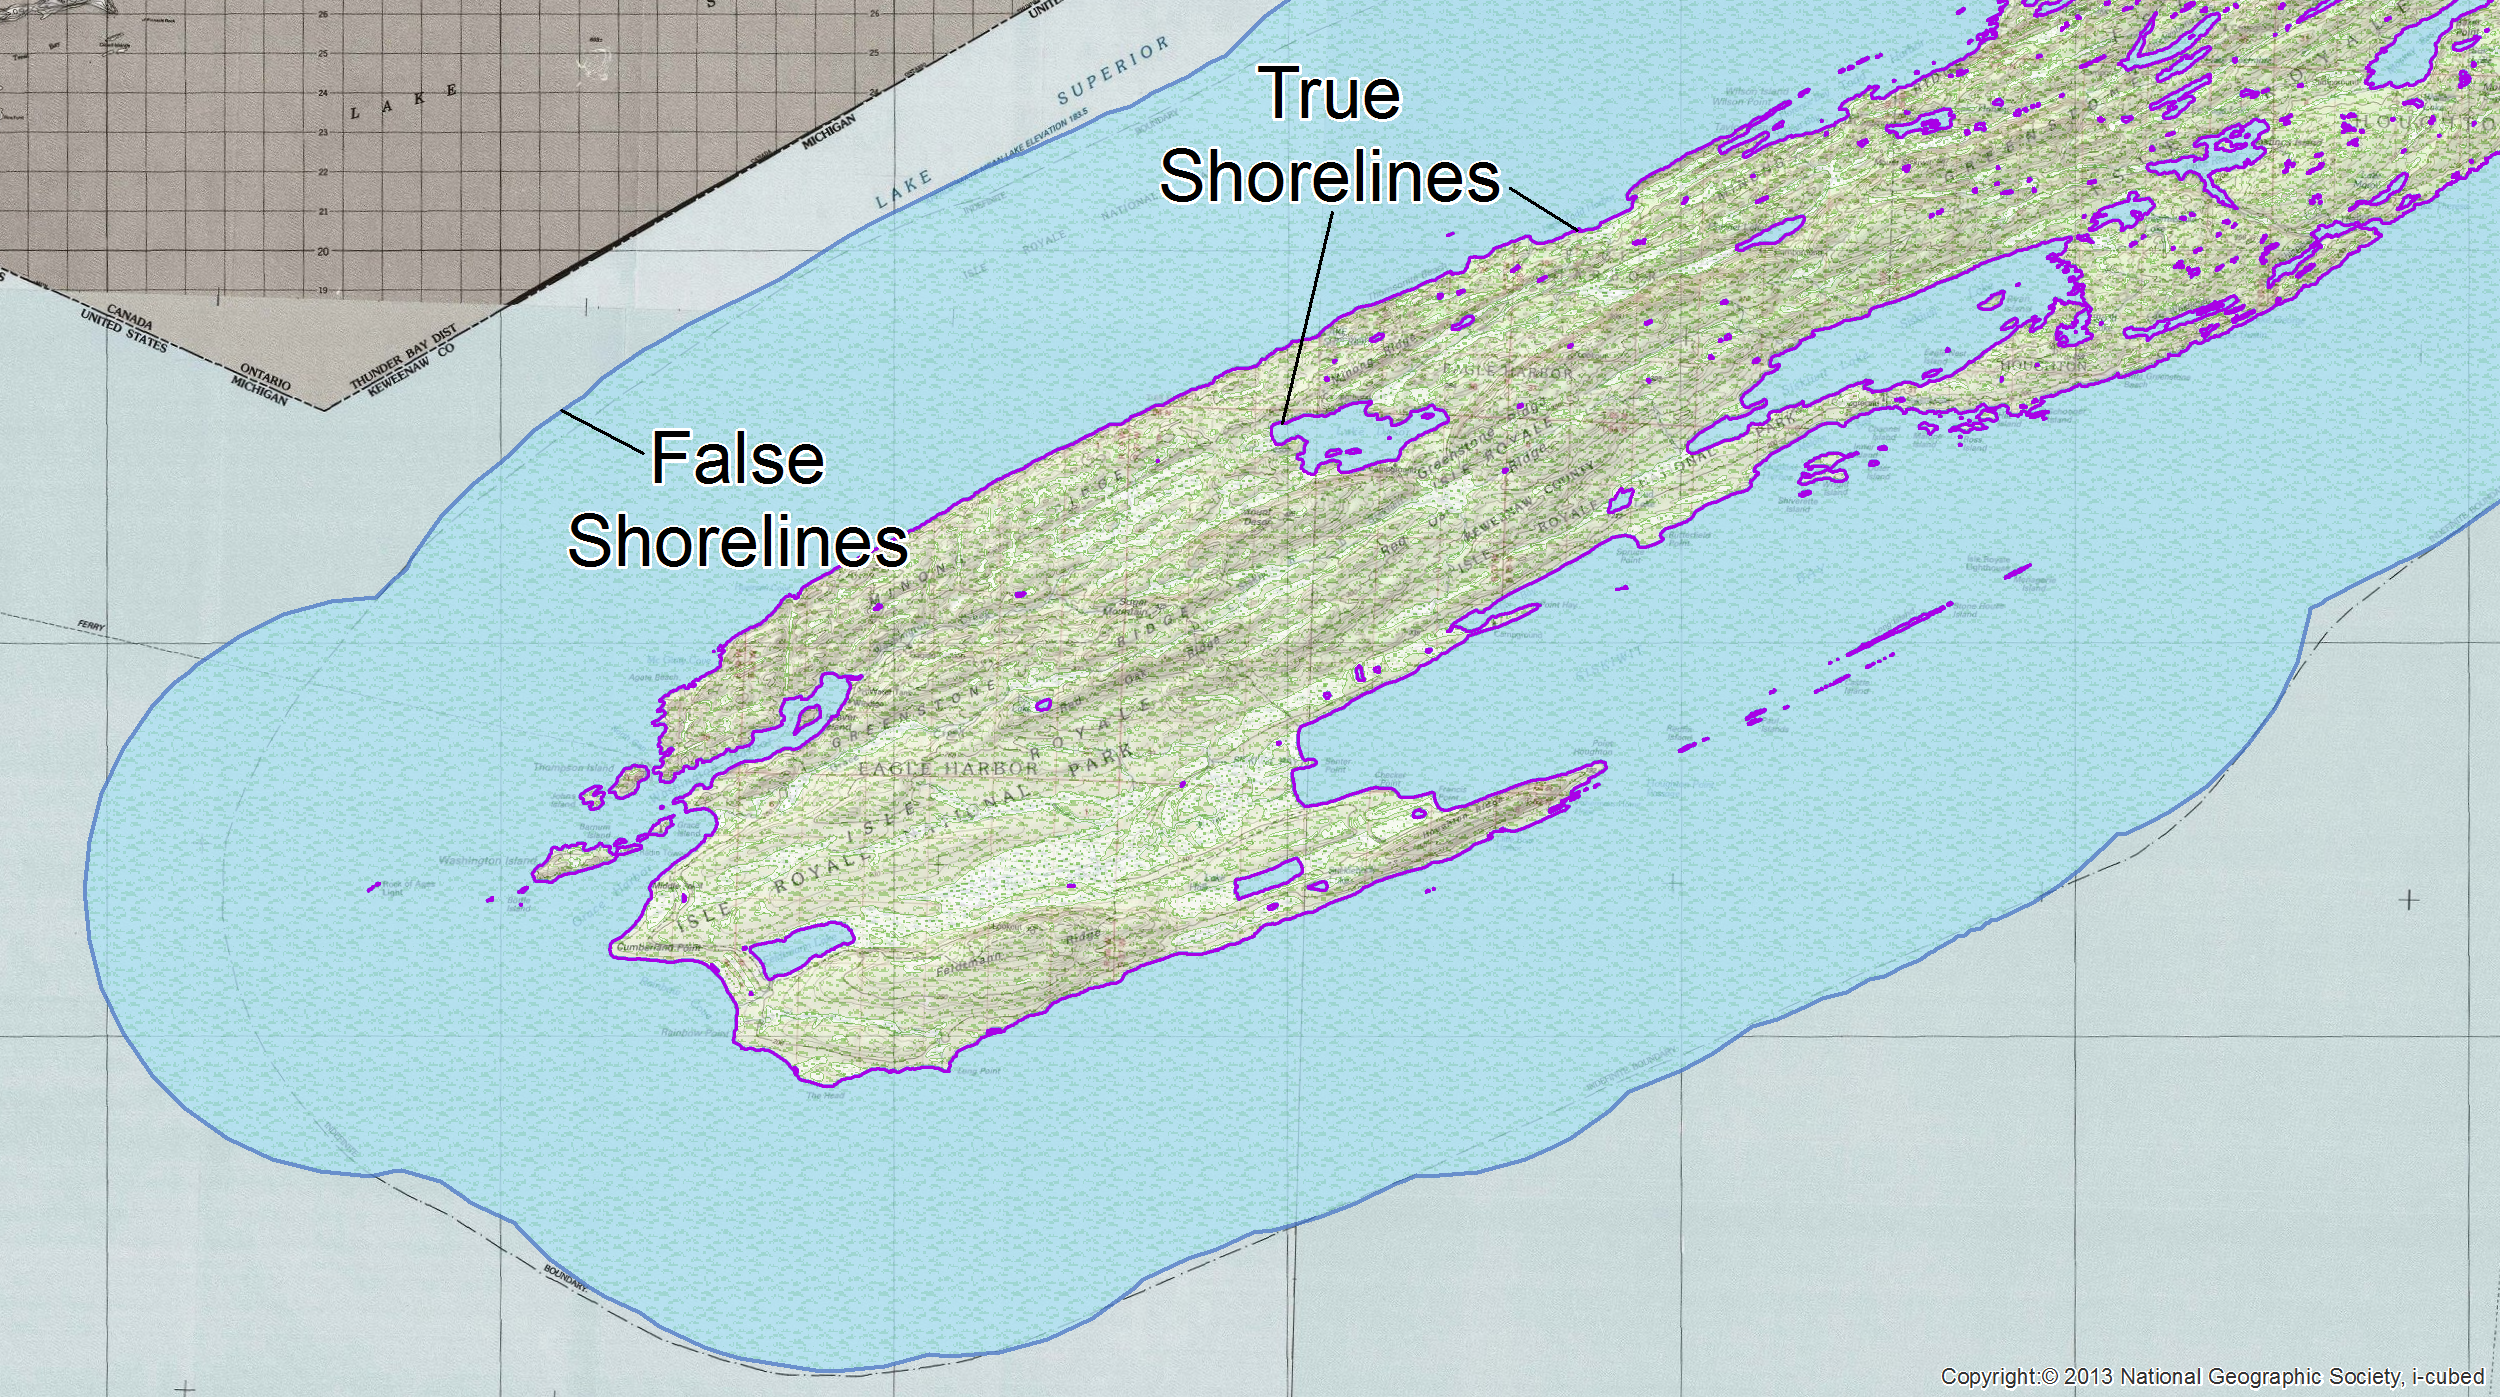 "False" shorelines were manually deleted using the split tool. The "Calculate Geometry" tool was employed to calculate miles of all true shorelines within each park.